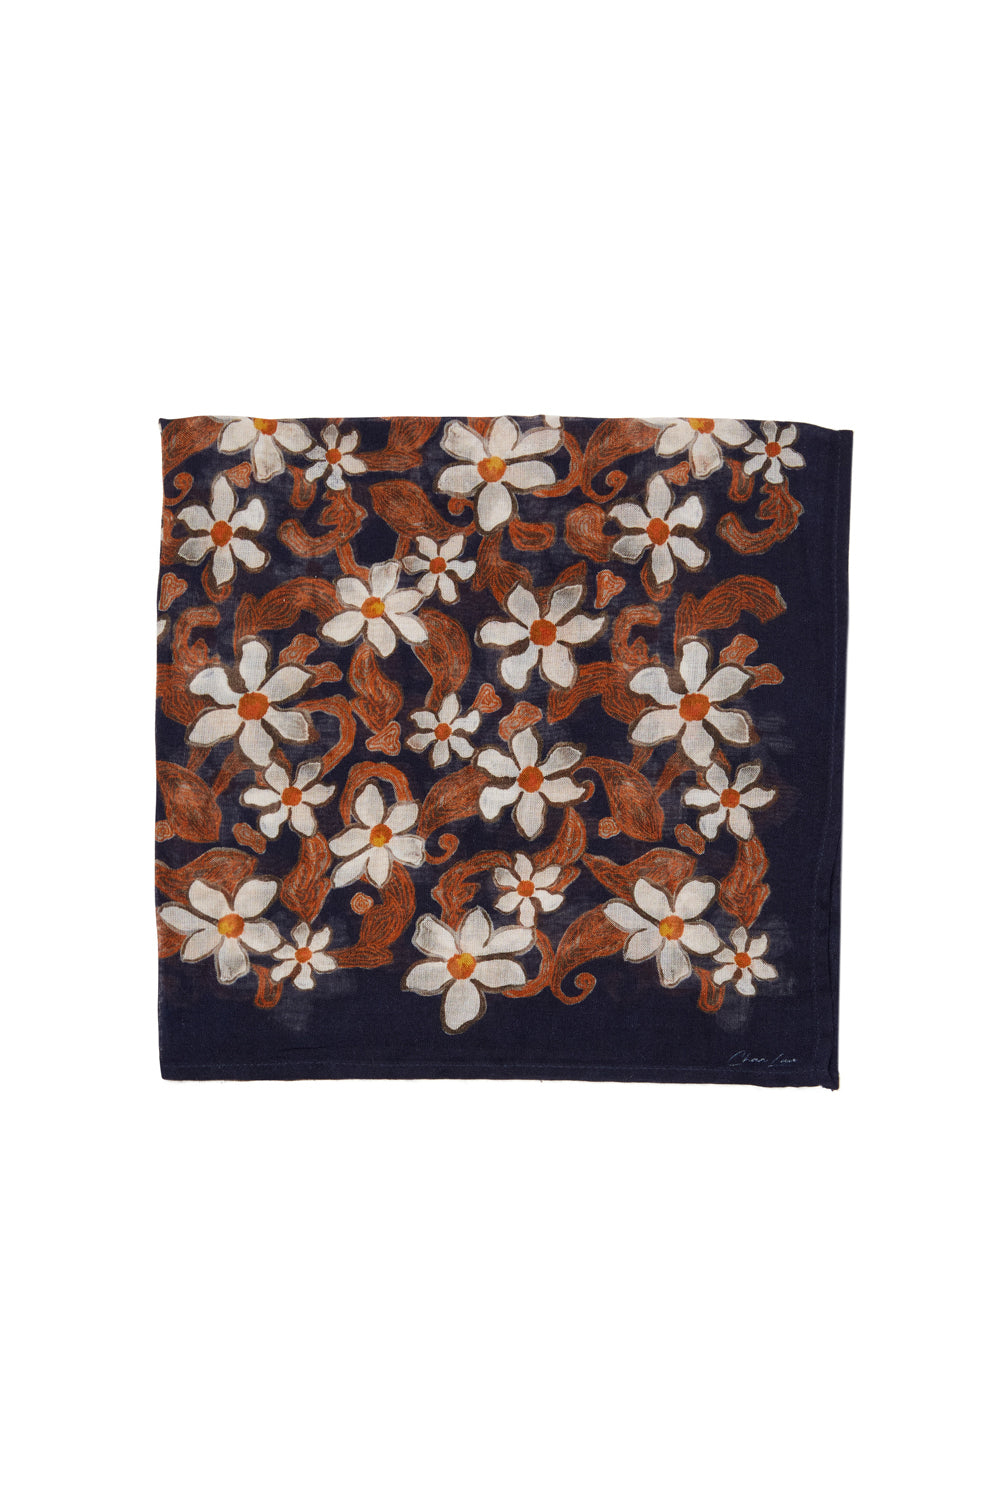 ABSTRACT FLORAL BANDANA-DARK SAPPHIRE - Kingfisher Road - Online Boutique